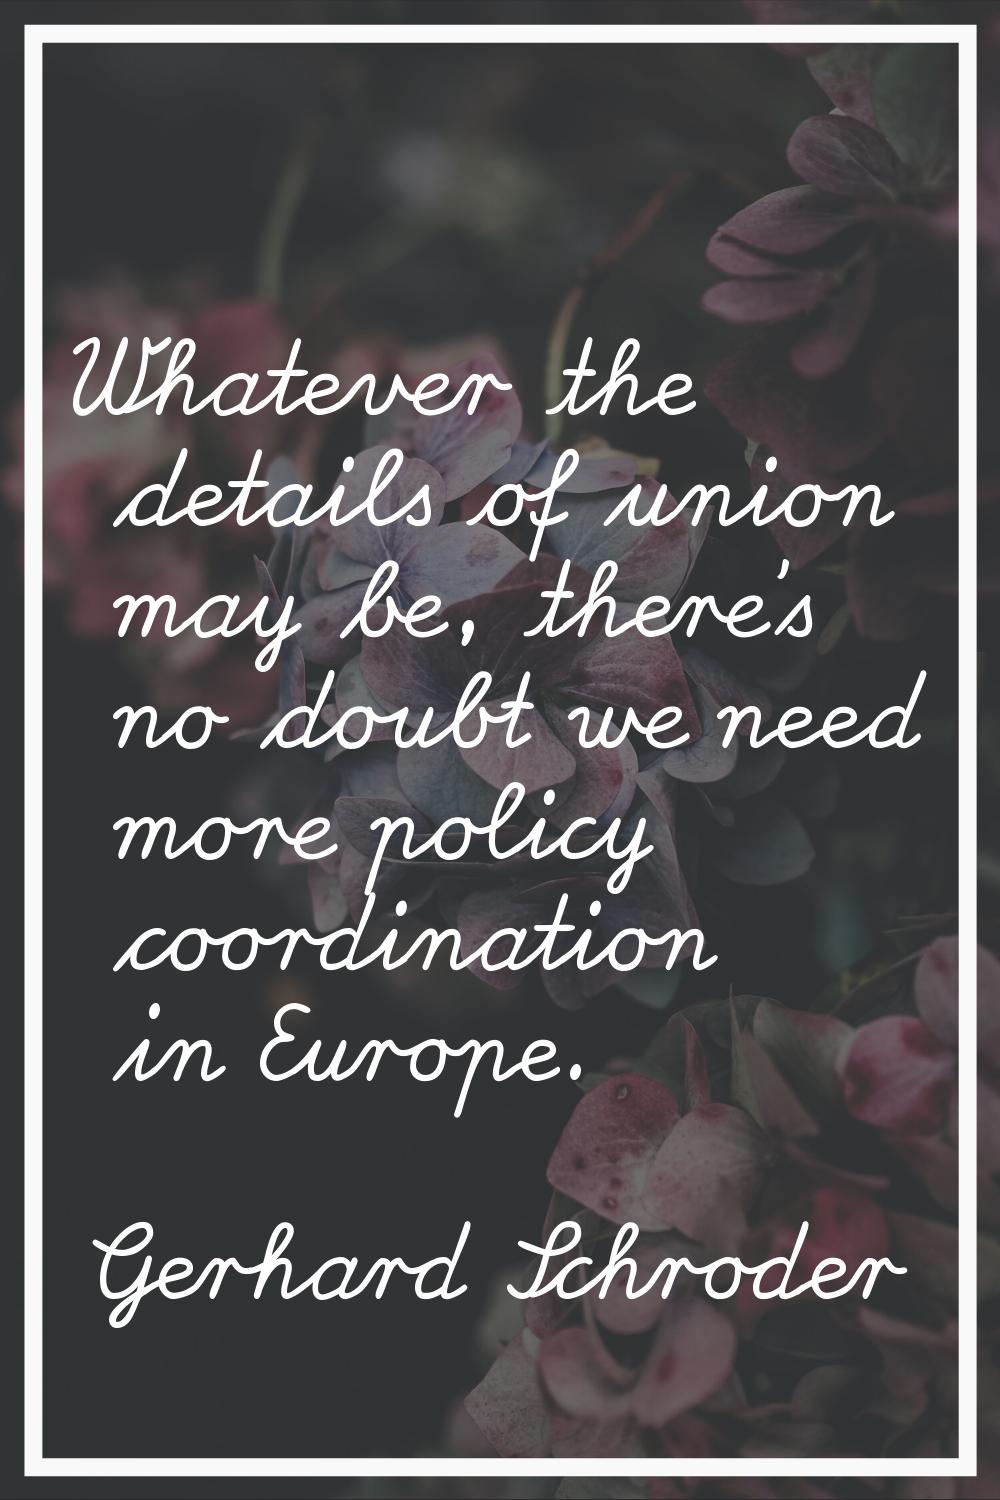 Whatever the details of union may be, there's no doubt we need more policy coordination in Europe.